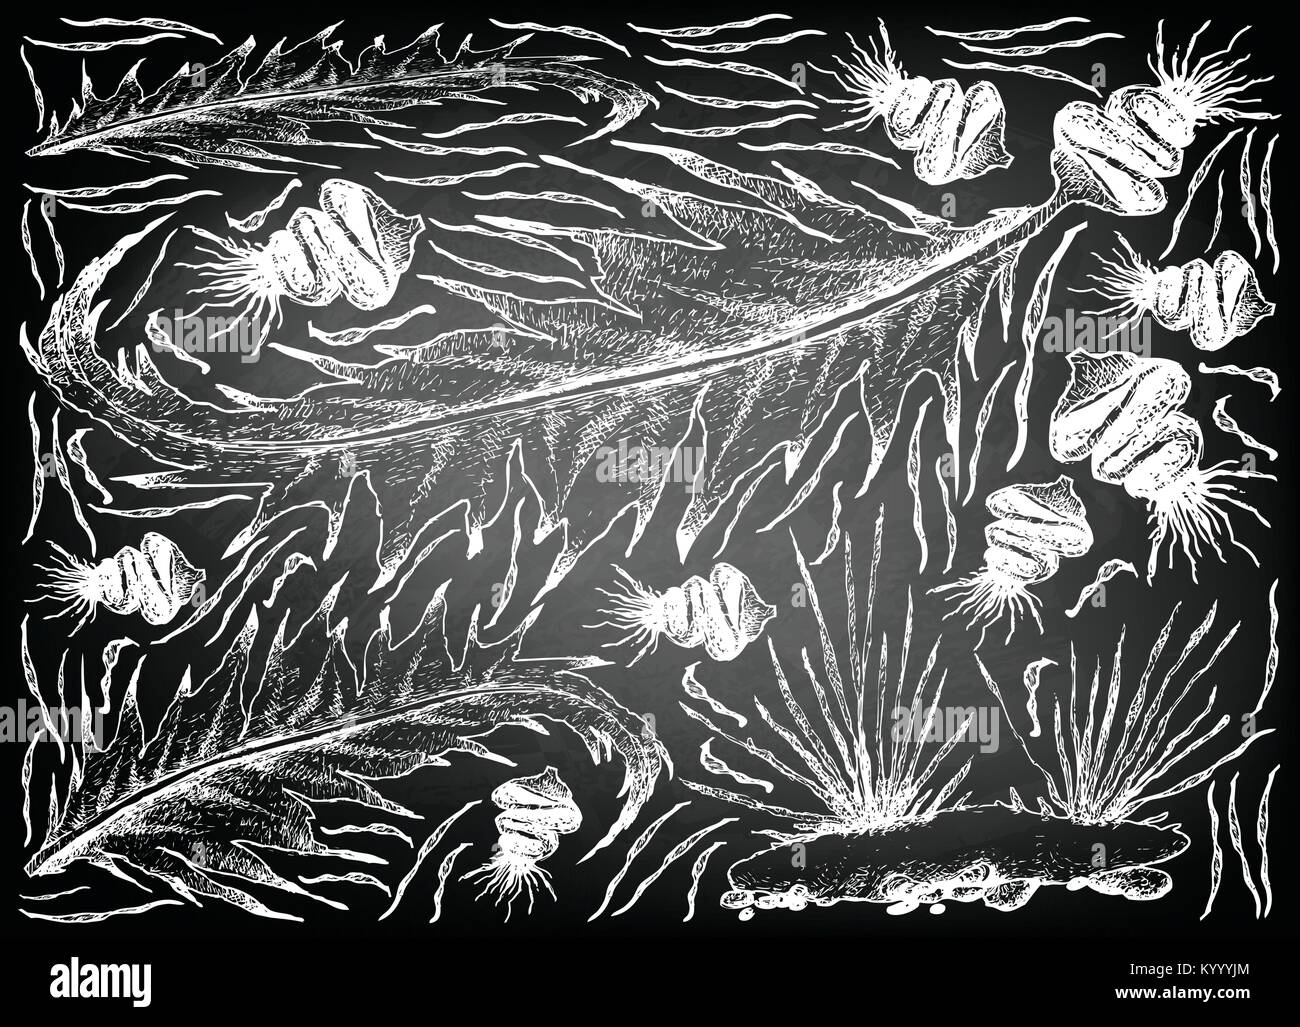 Sea Vegetables, Illustration Background of Hand Drawn Sketch Delicious Fresh Wakame and Aonori Seaweed on Black Chalkboard. High in Calcium, Magnesium Stock Vector